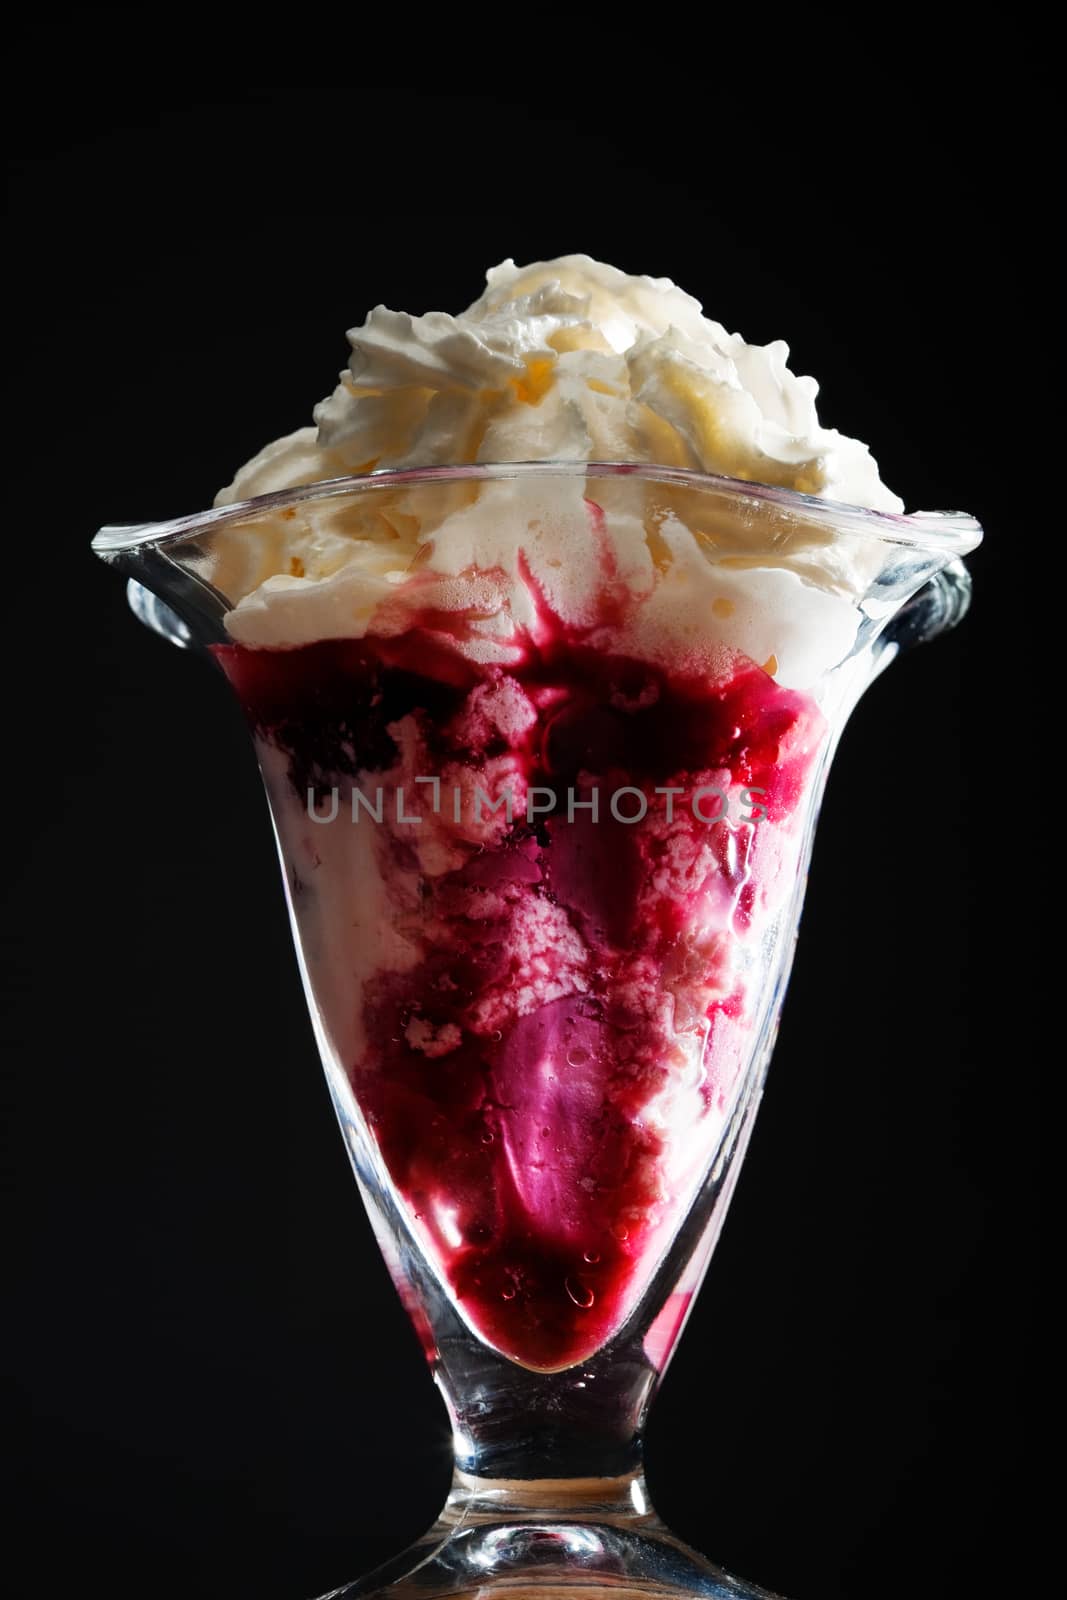 Ice cream in the glass by terex